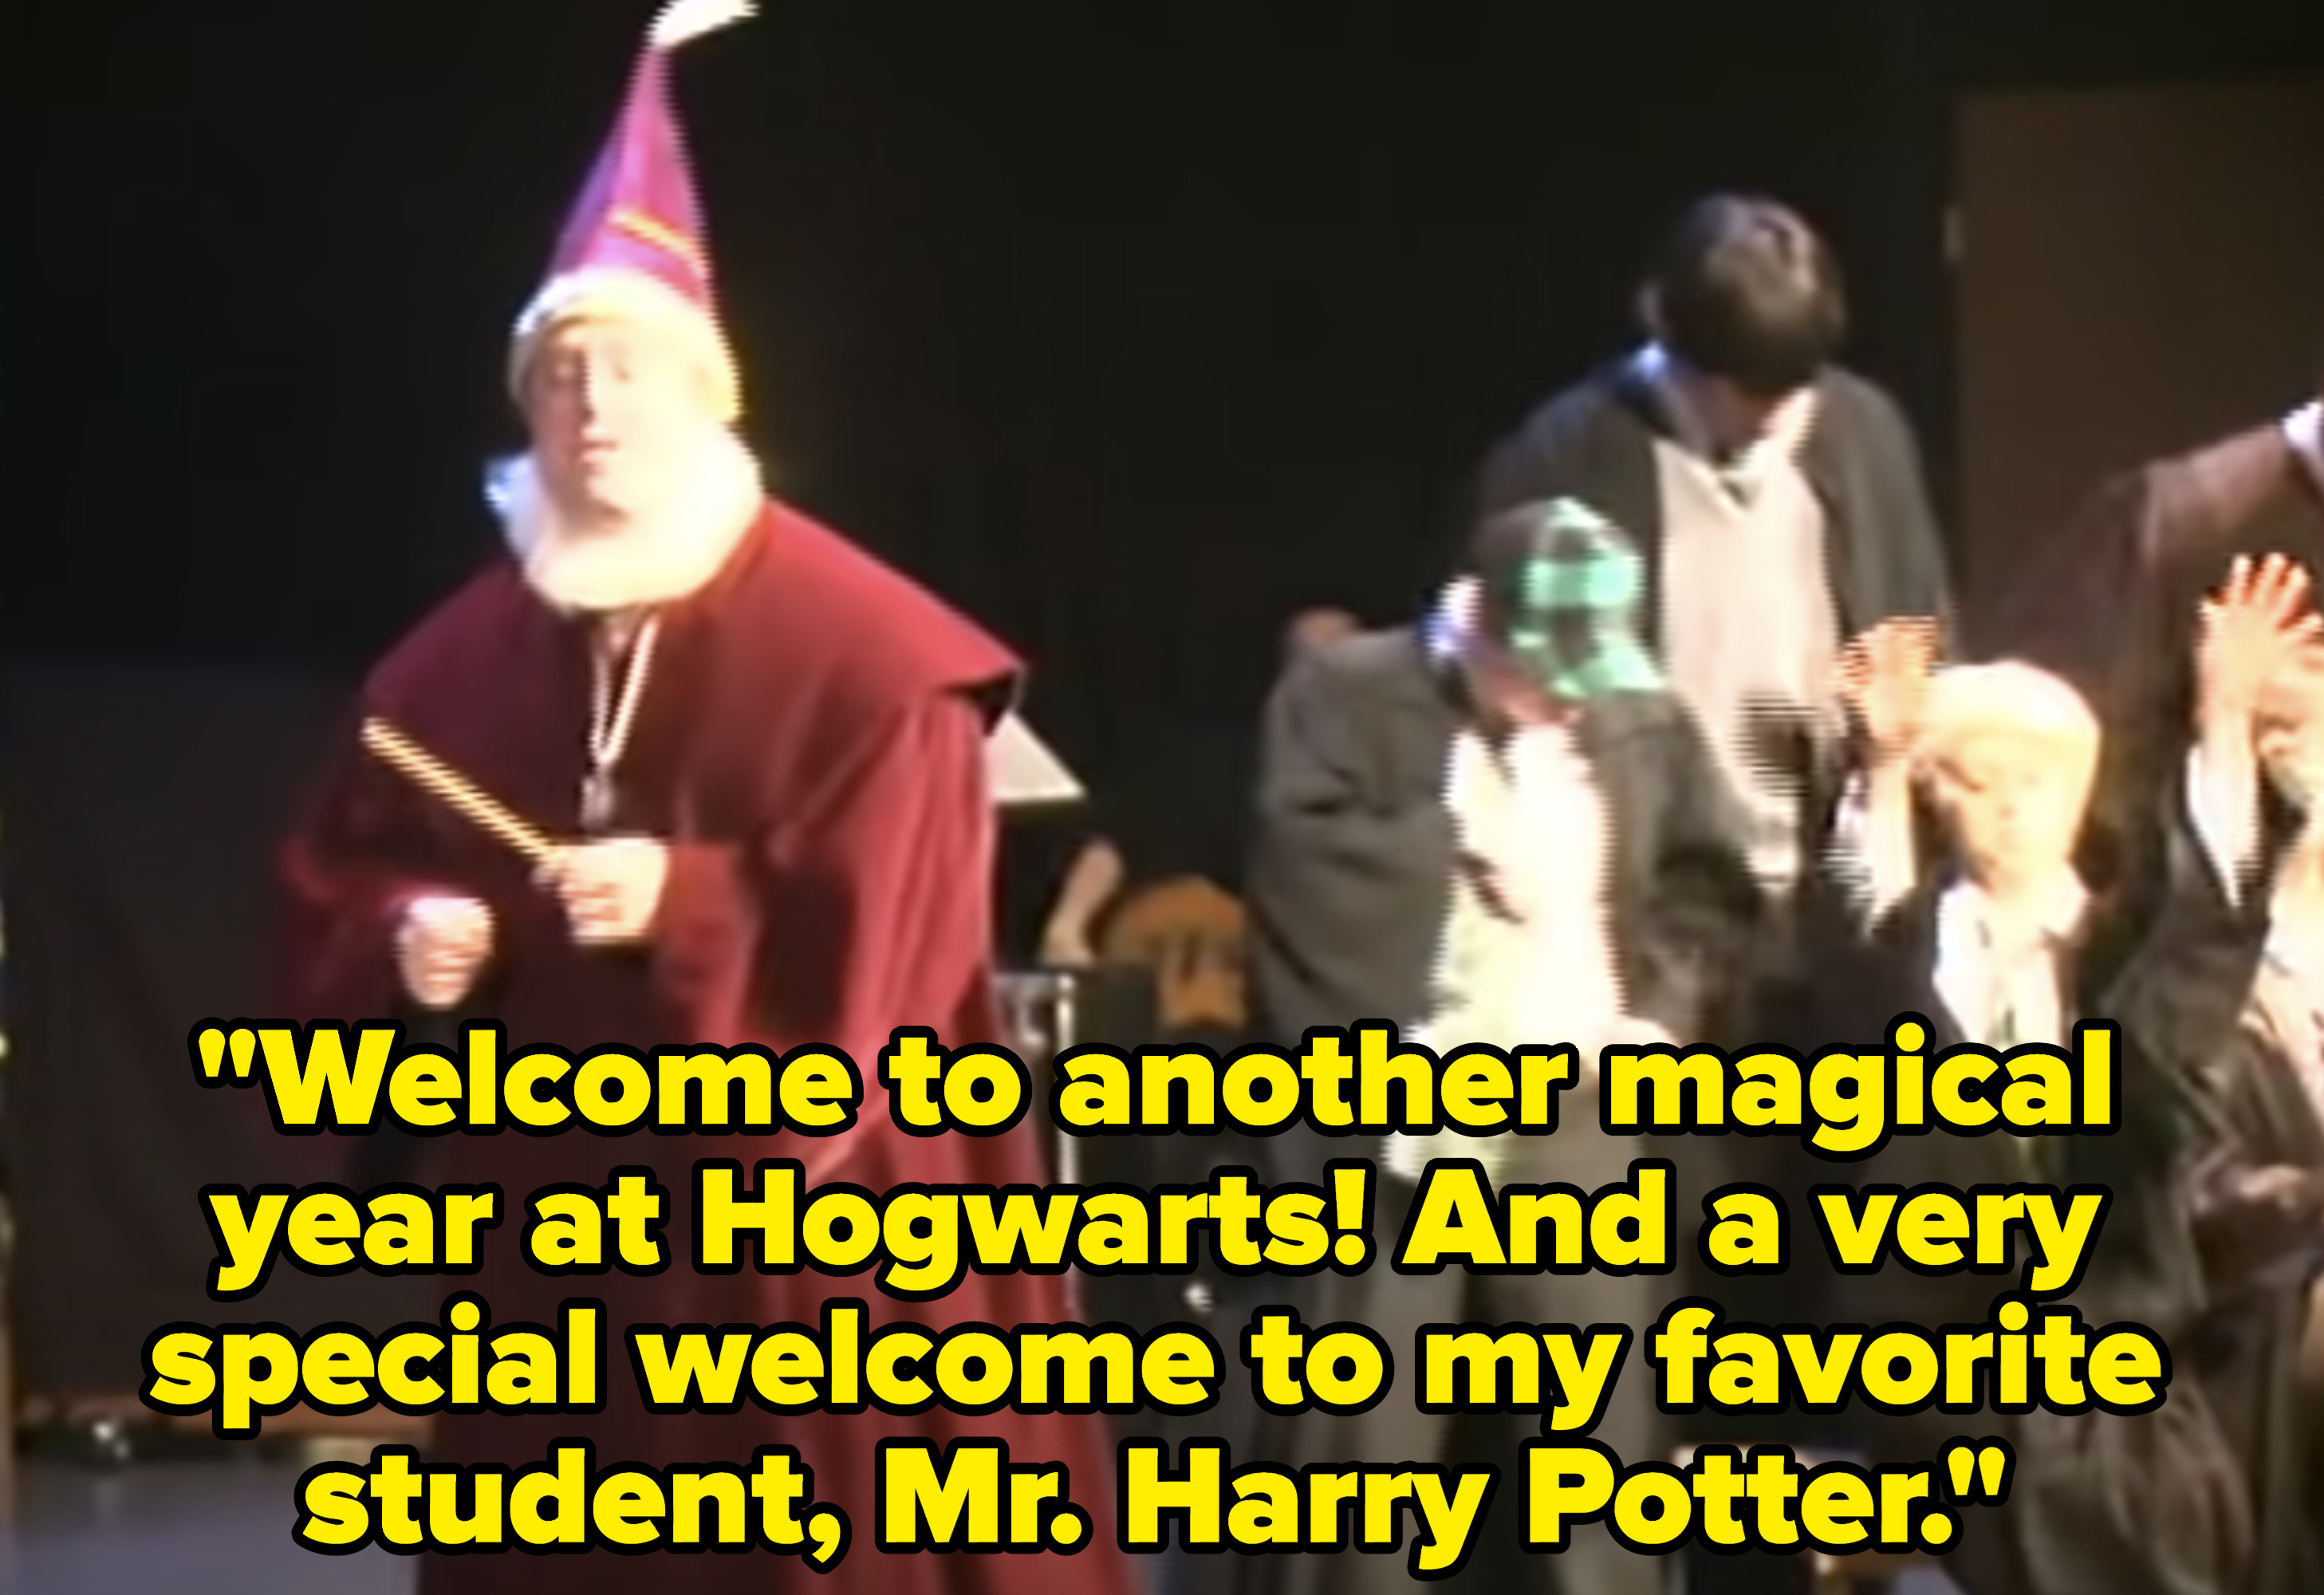 Help me find a specific Harry Potter meme titled “Welcome to